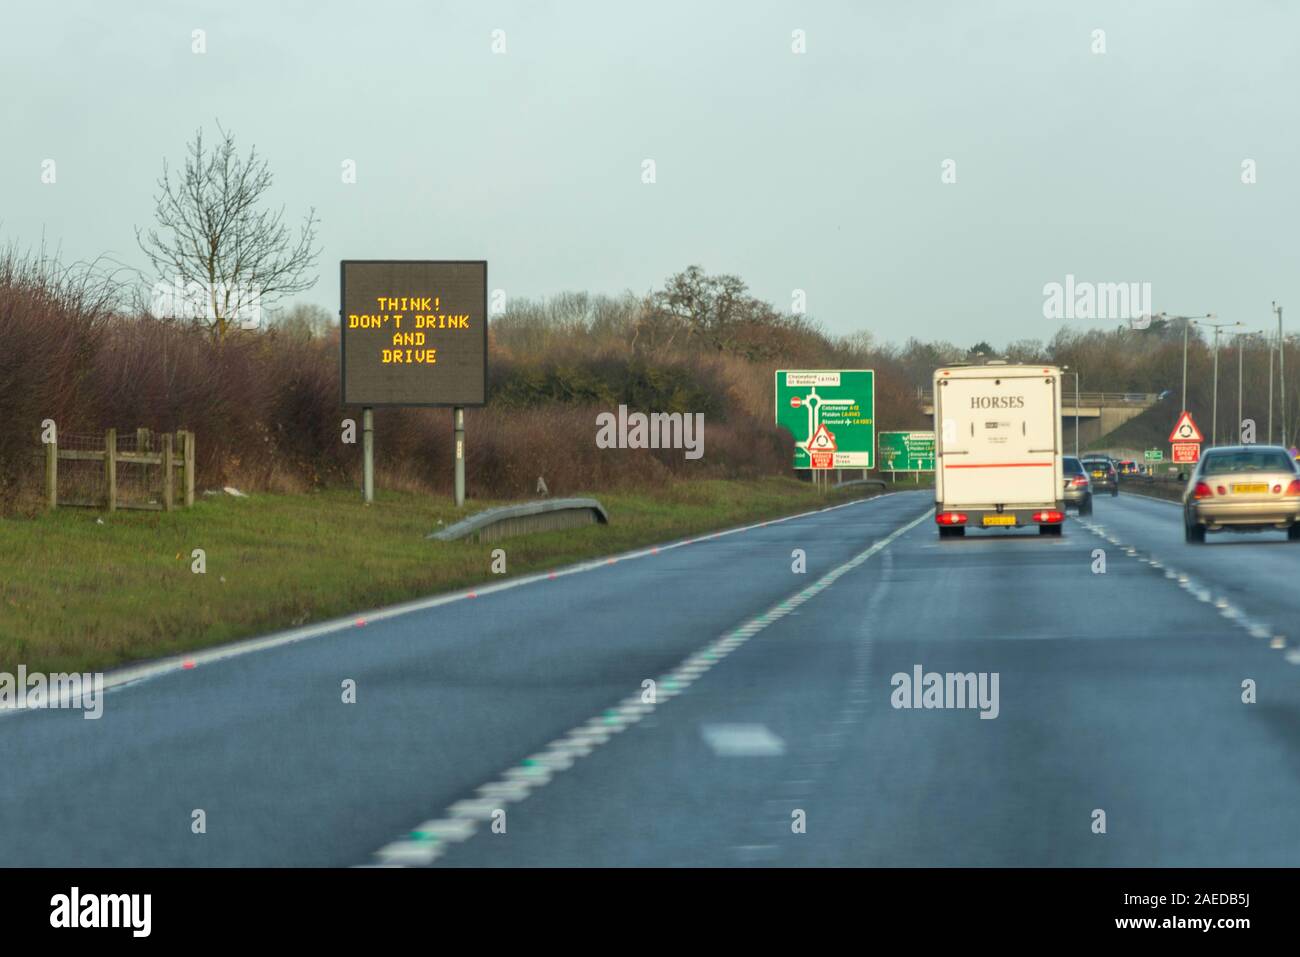 Think, Don't drink and drive matrix sign with vehicles approaching A12 Chelmsford, Essex, UK driving on a stretch of A130 duel carriageway. Warning Stock Photo